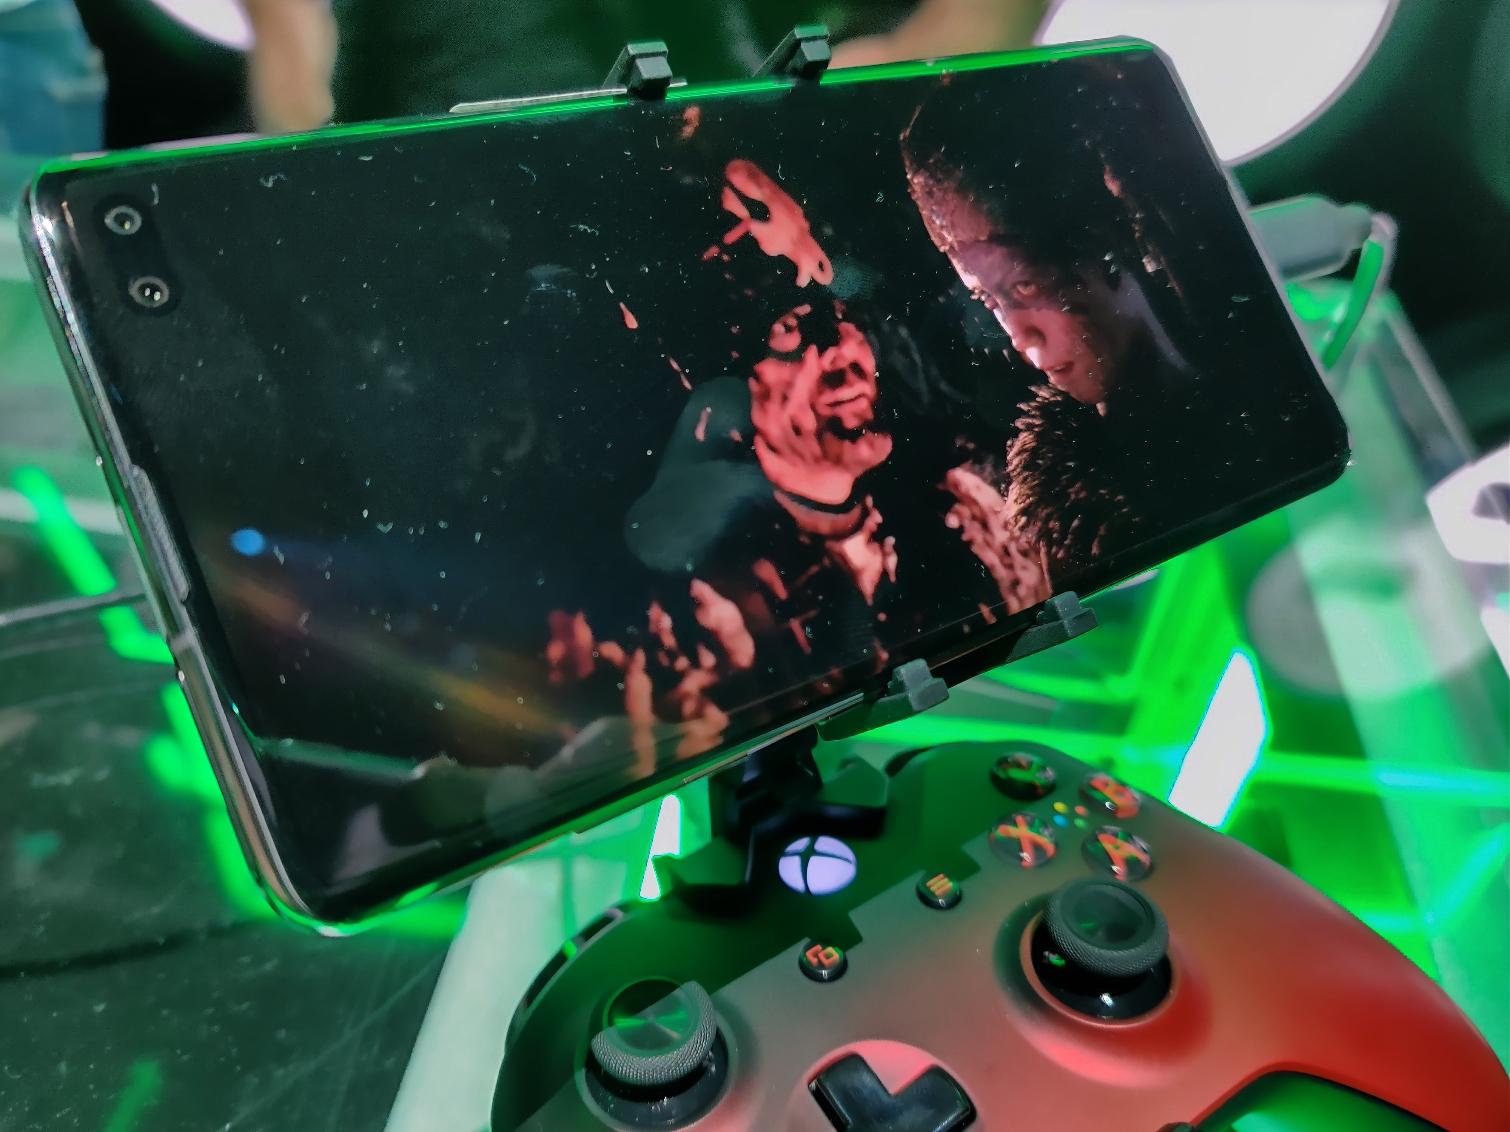 Google Stadia vs. Project xCloud: Which Cloud Gaming Service Will Win?